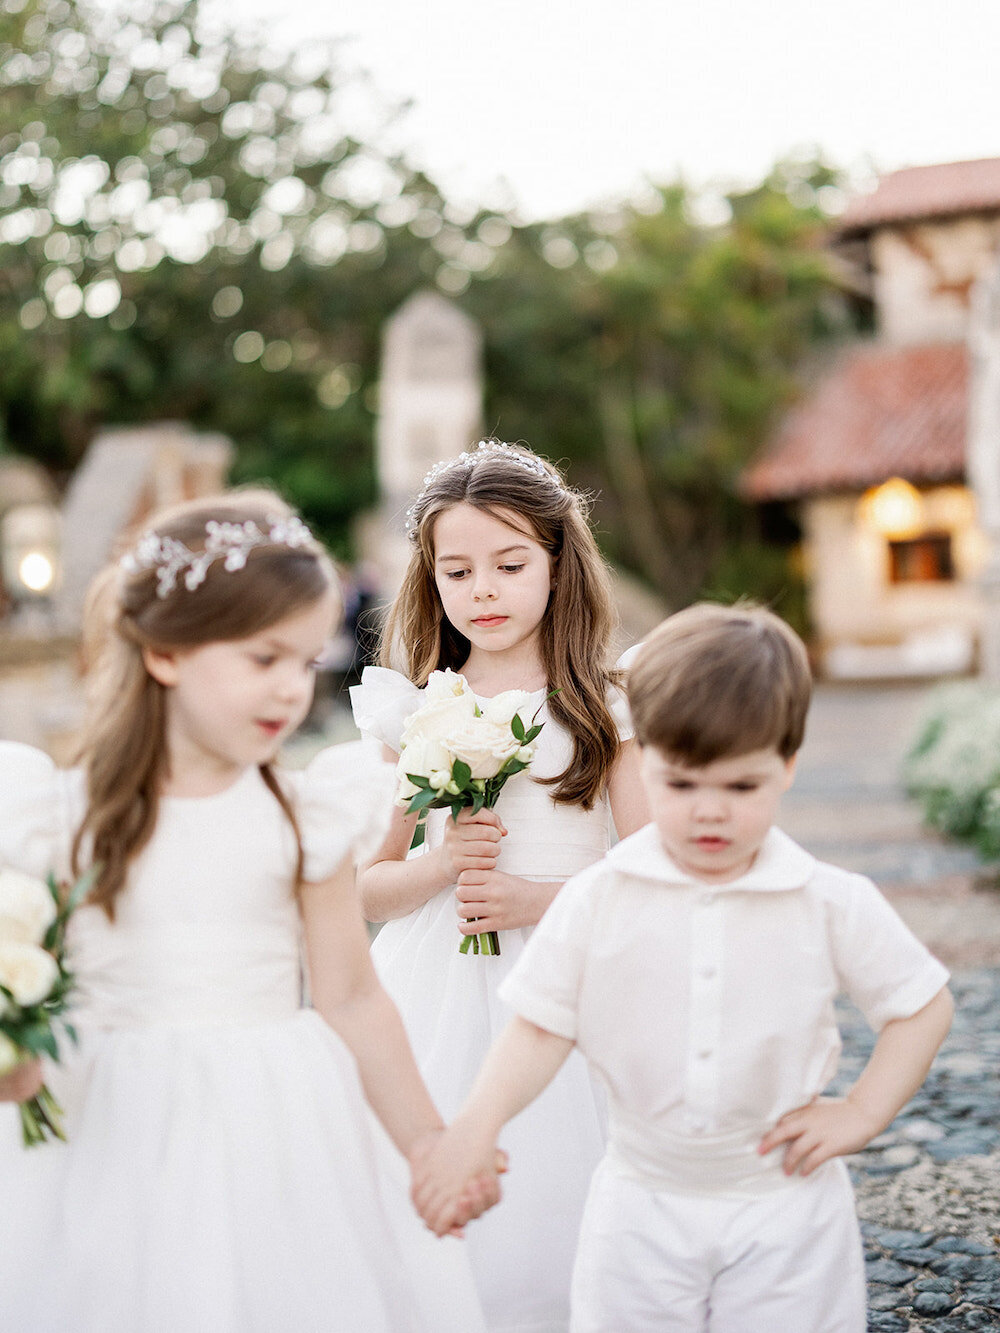 Flower girls and ring bearers walking down the aisle at a destination wedding